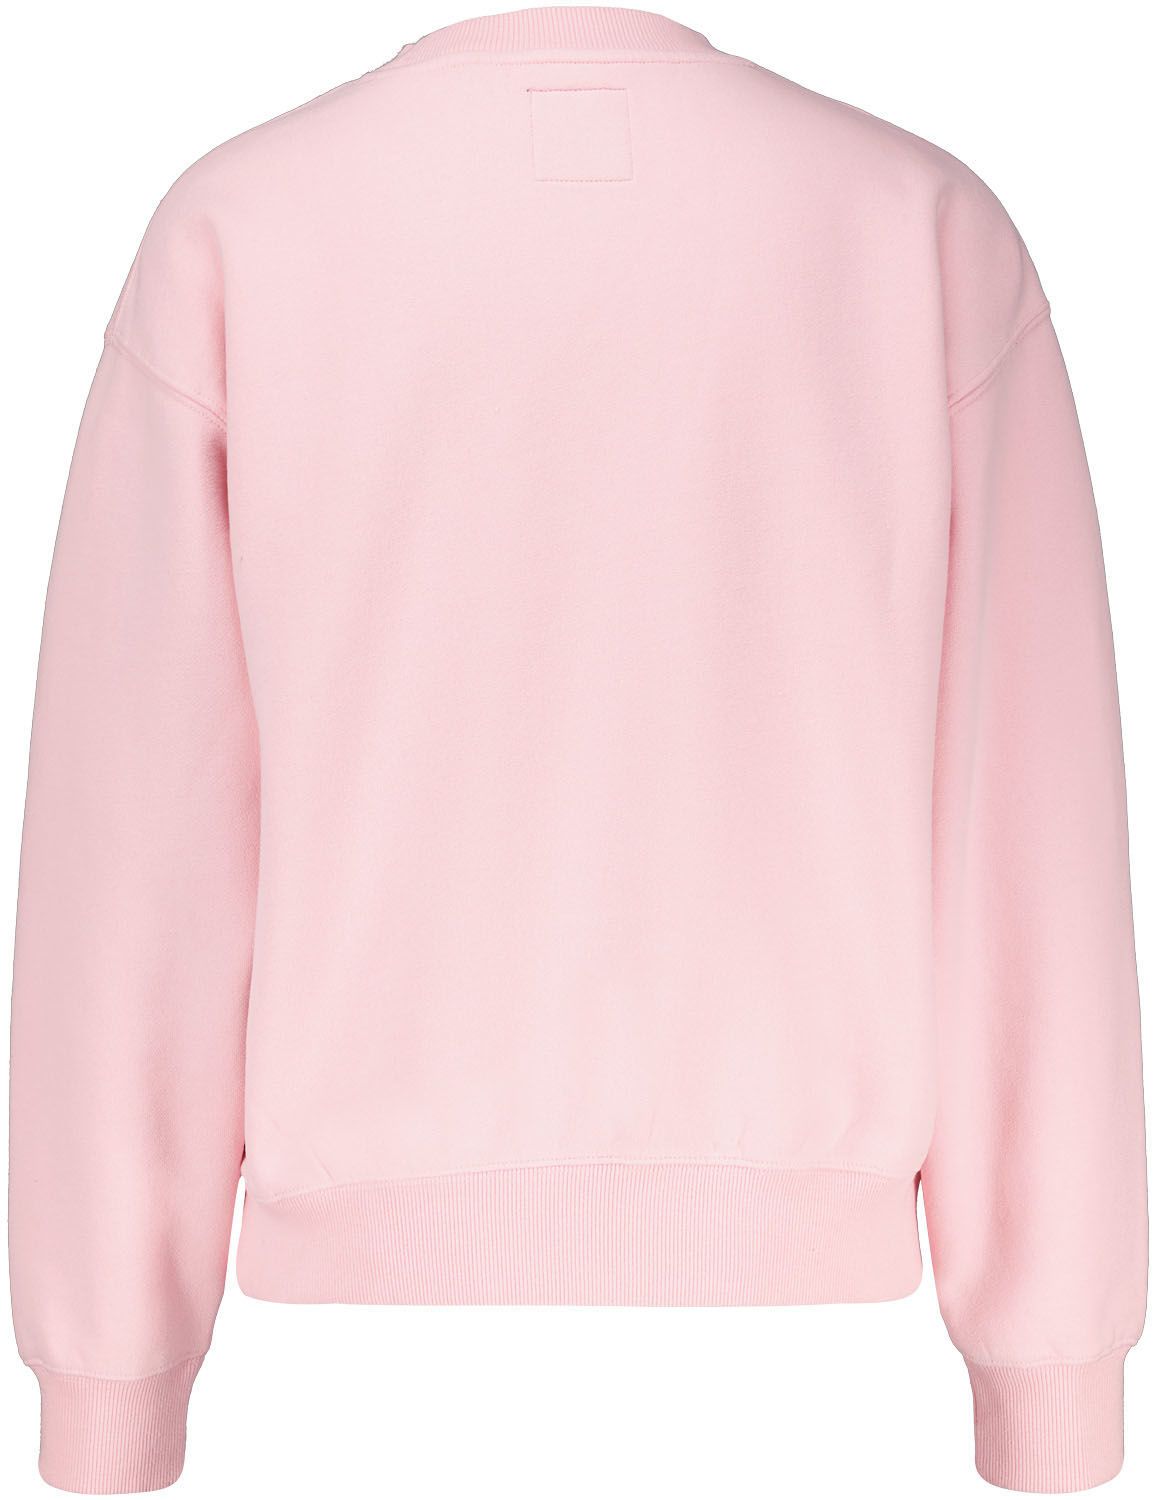 Superdry Sweater Atletic Roze